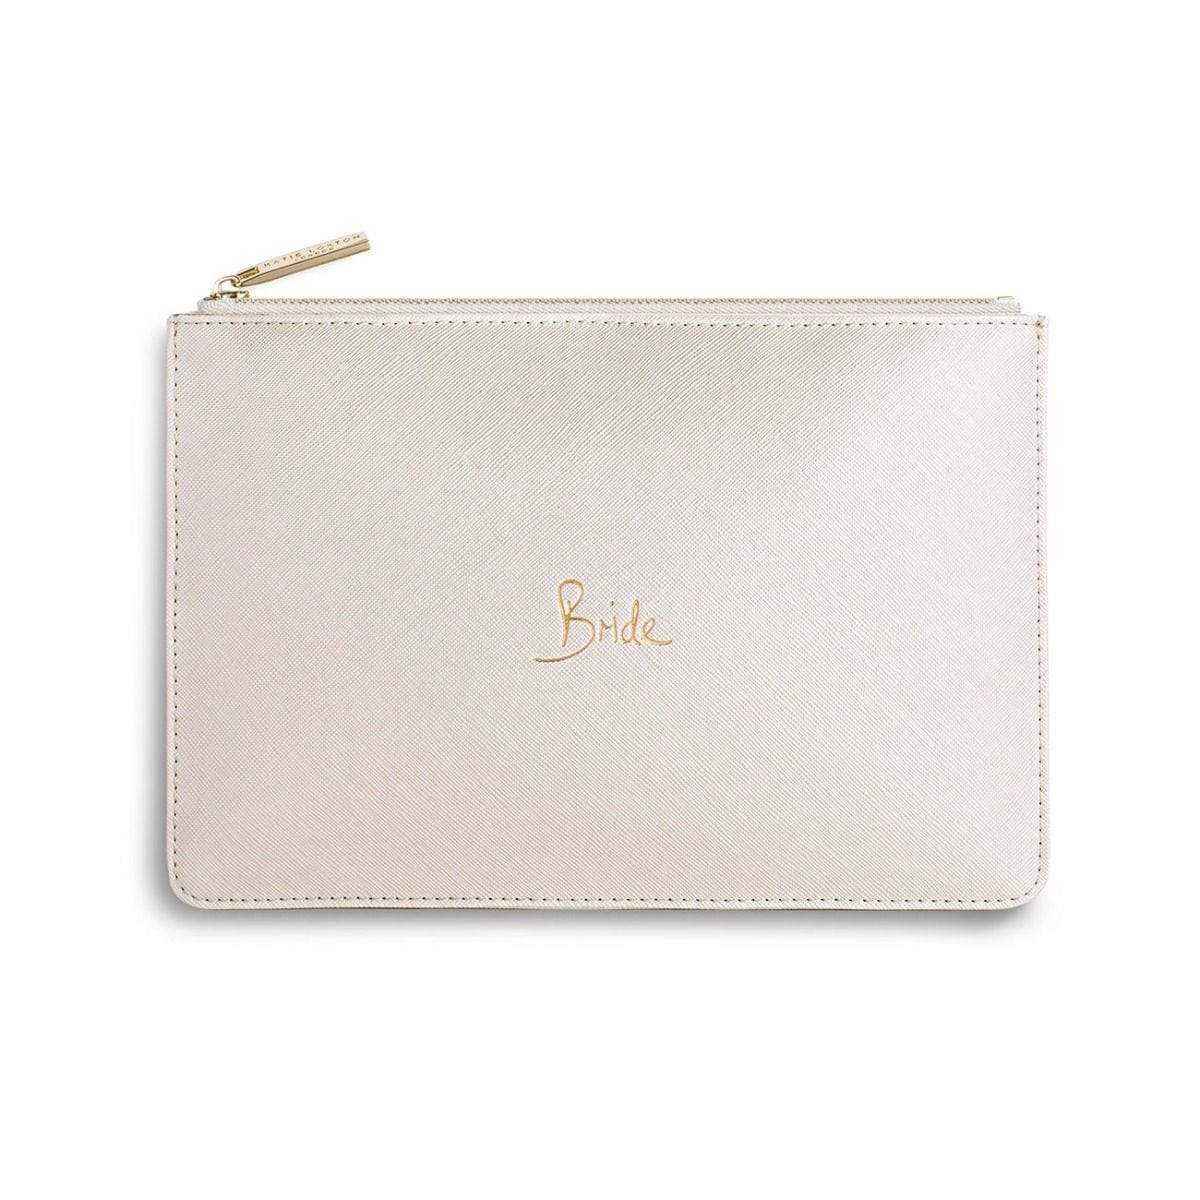 Katie Loxton Gifts One Size Katie Loxton Bride Perfect Pouch in Metallic White KLB212 izzi-of-baslow